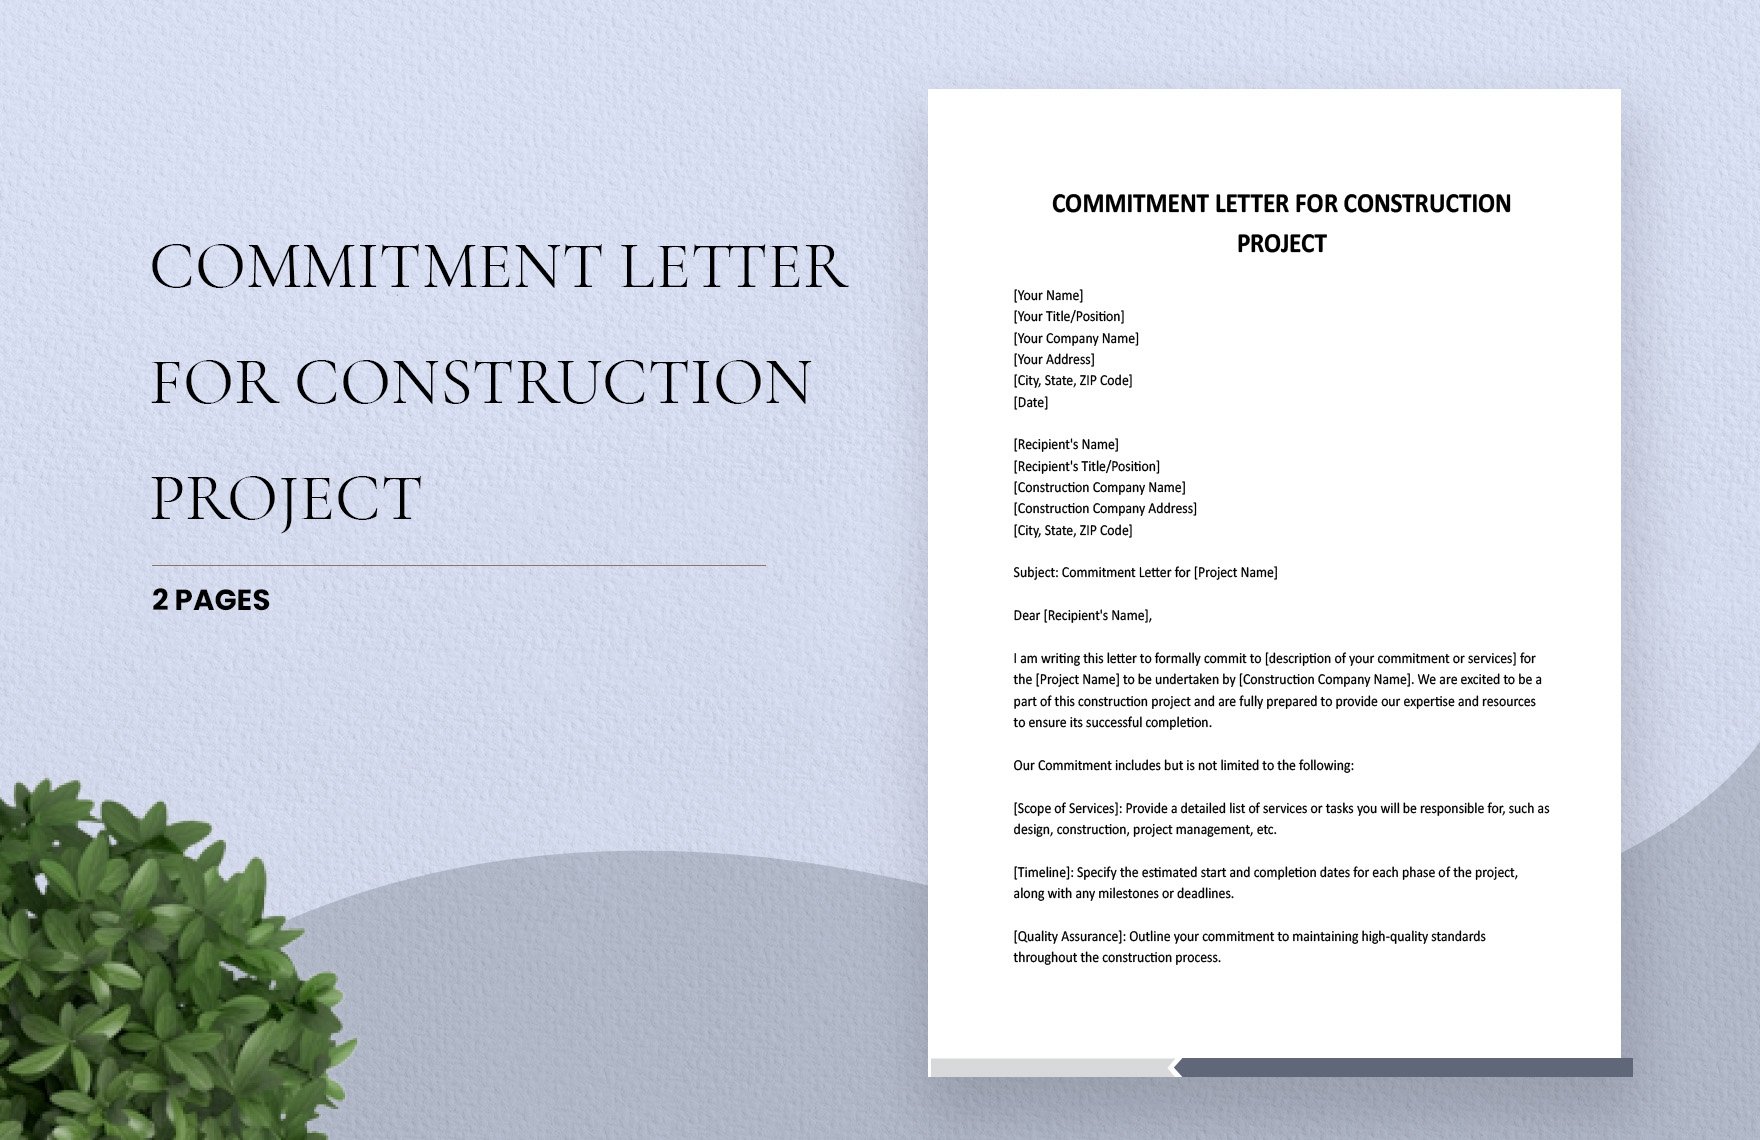 Free Commitment Letter For Construction Project in Word, Google Docs, Apple Pages